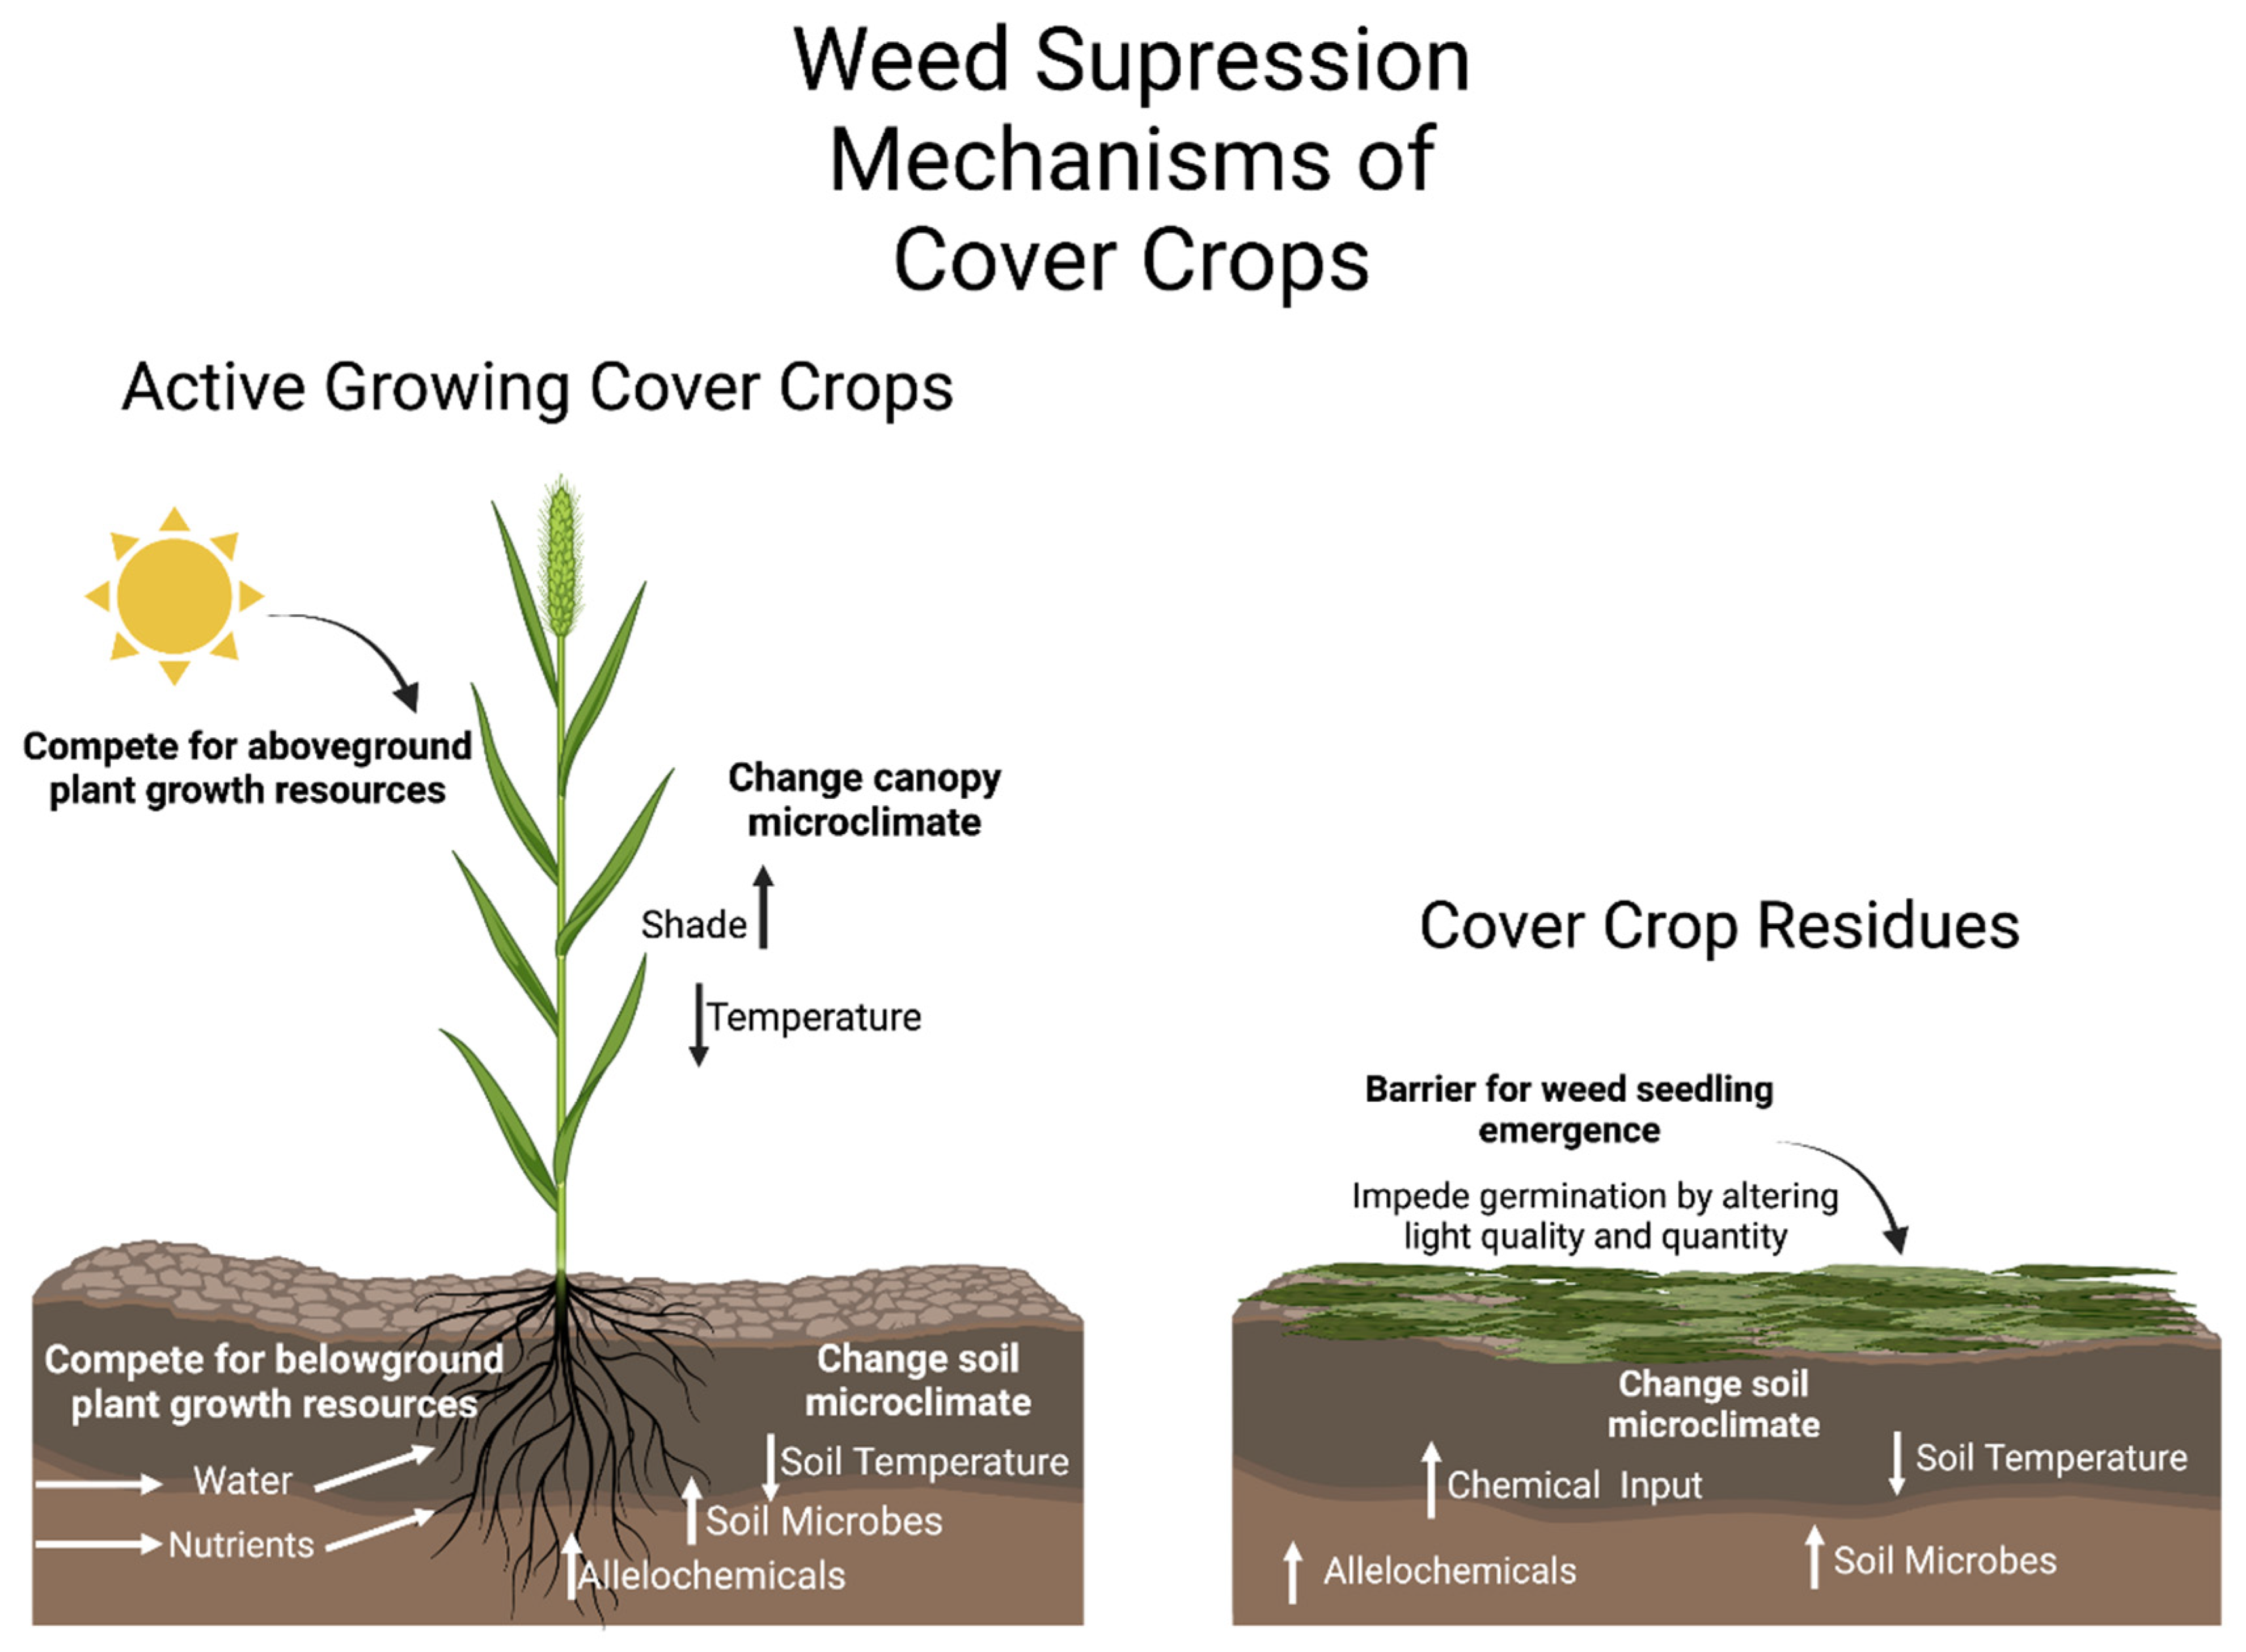 III. Importance of Soil Composition in Marijuana Cultivation